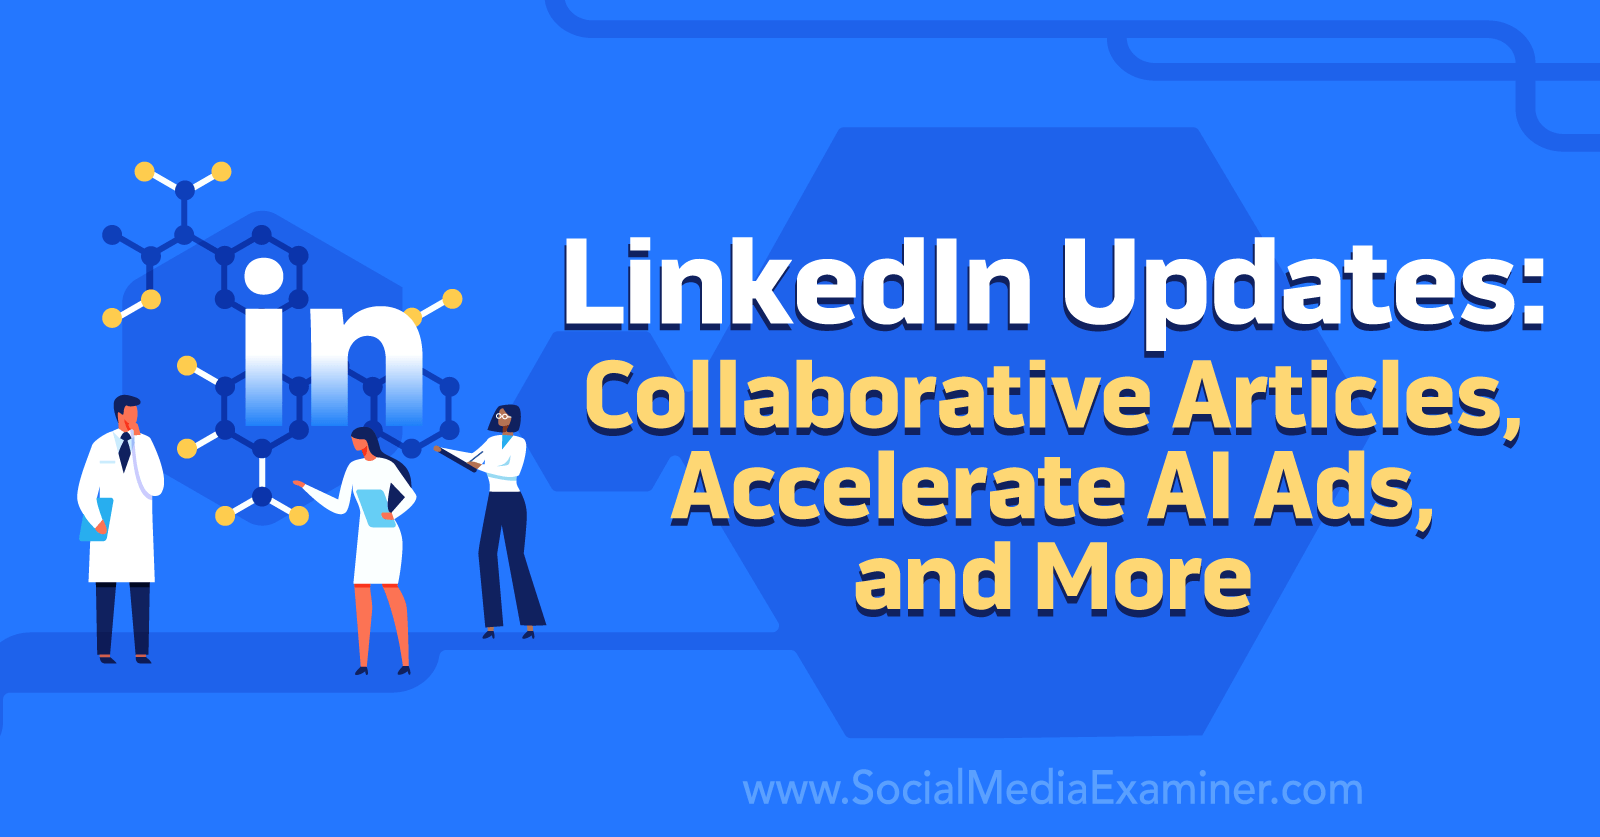 LinkedIn Updates: Collaborative Articles, Accelerate AI Ads, and More by Social Media Examiner